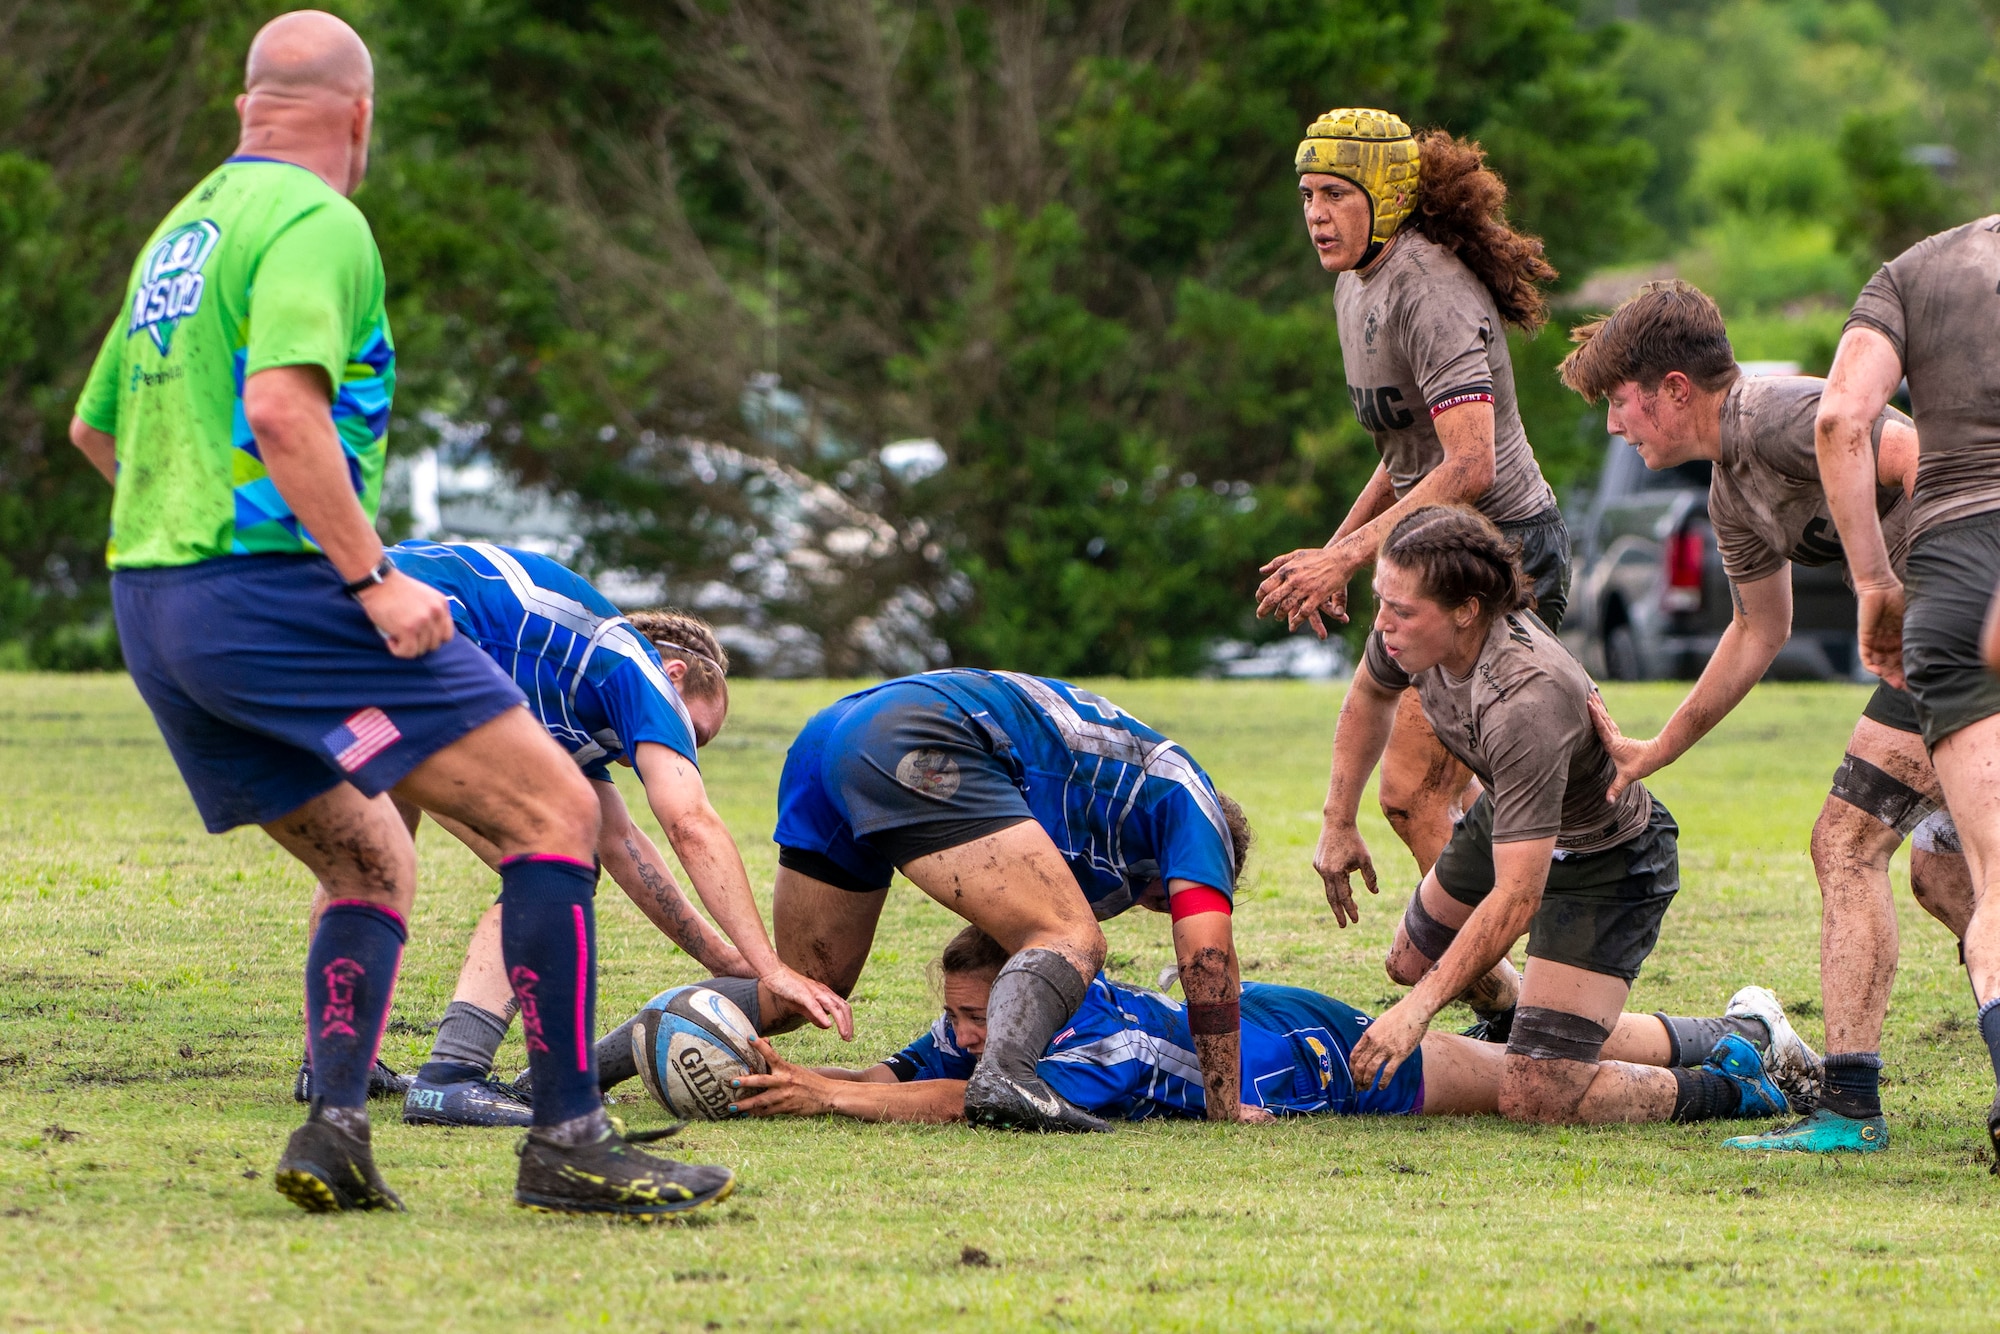 Members of the United States Air Force rugby team, blue, form a ruck during a game against the U.S. Marine Corps. Rugby team at the Annual Armed Forces Women’s Rugby Championship in Wilmington, North Carolina, June 26, 2021.